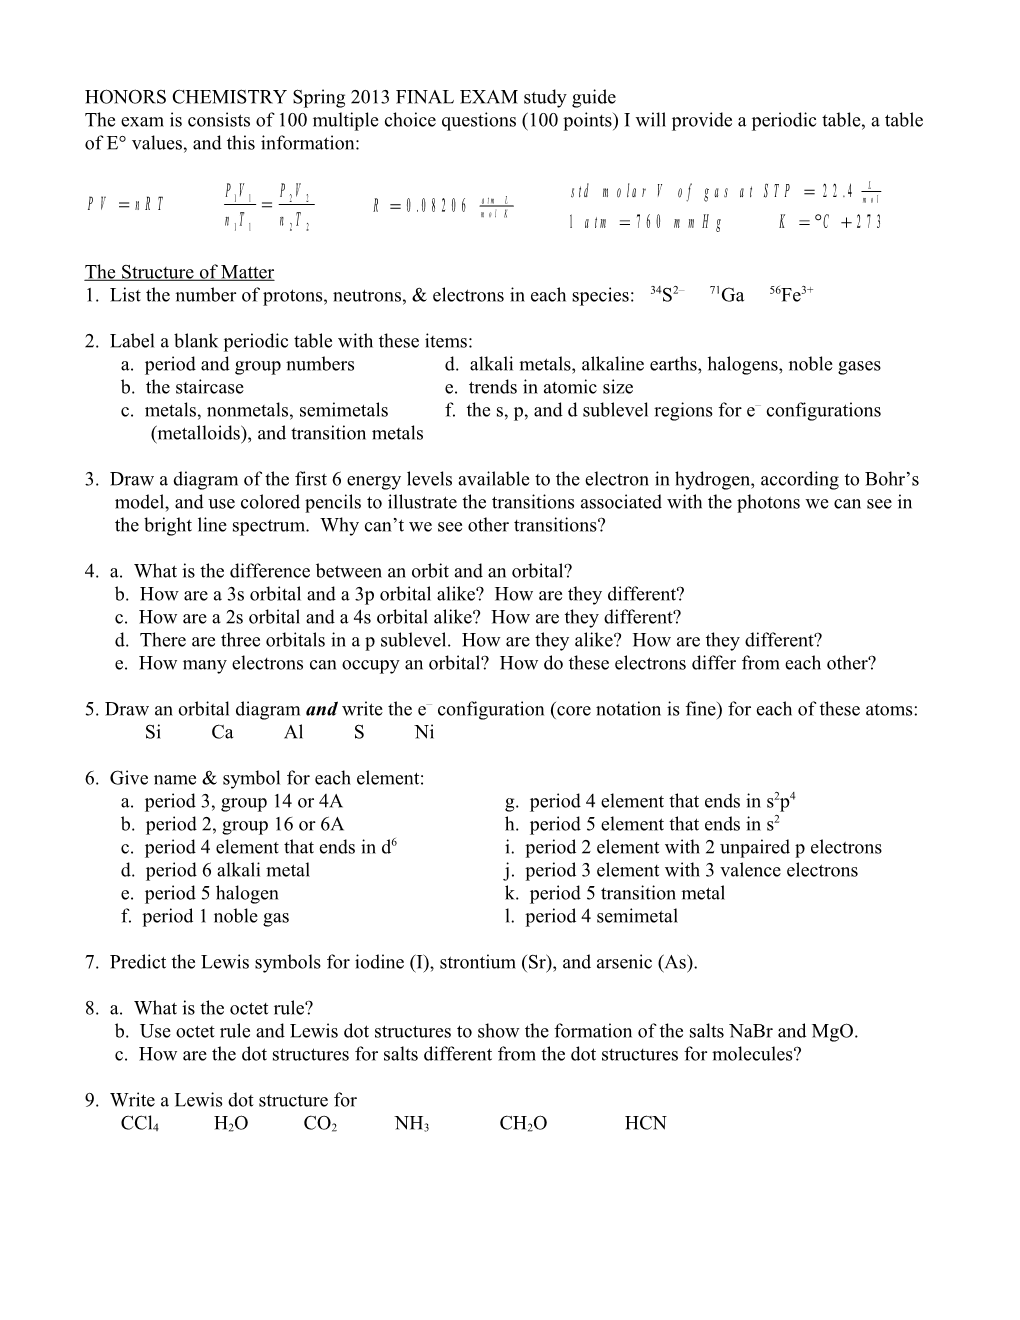 HONORS CHEMISTRY Spring 05 FINAL EXAM Study Materials